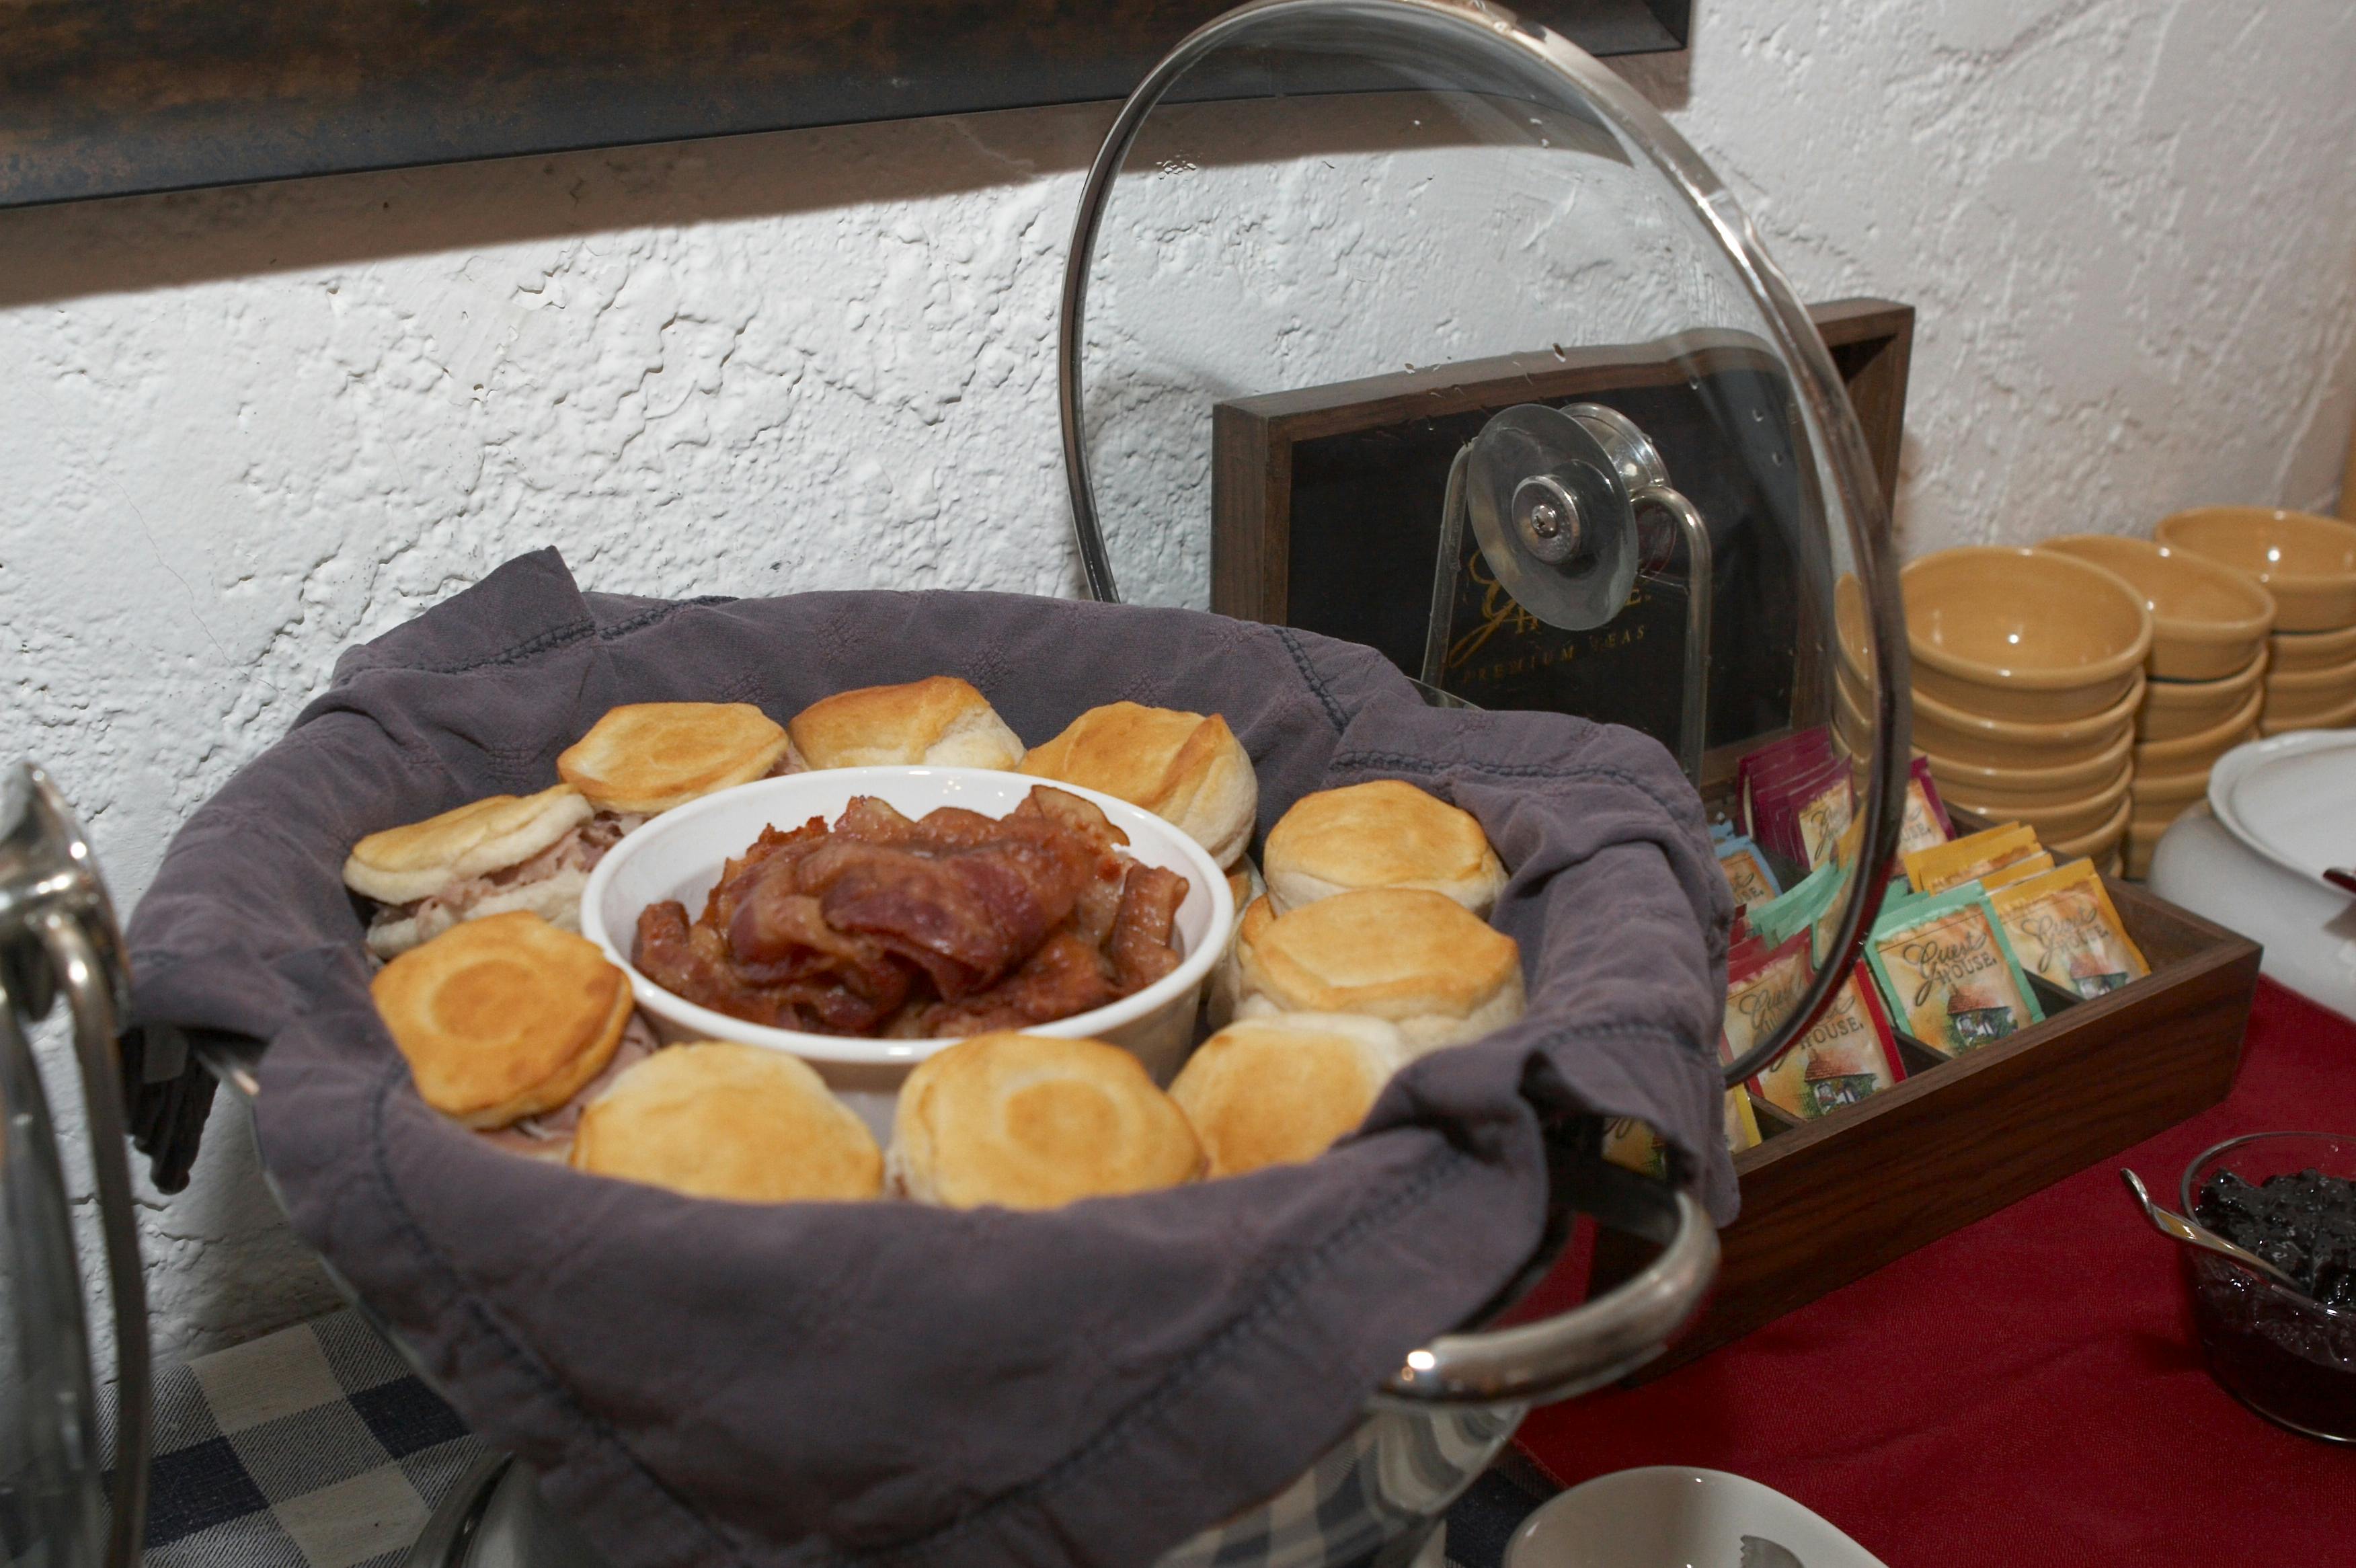 Bacon and biscuits in a metal serving bowl with hinged clear lid with tea in packets and yellow bowls in the background